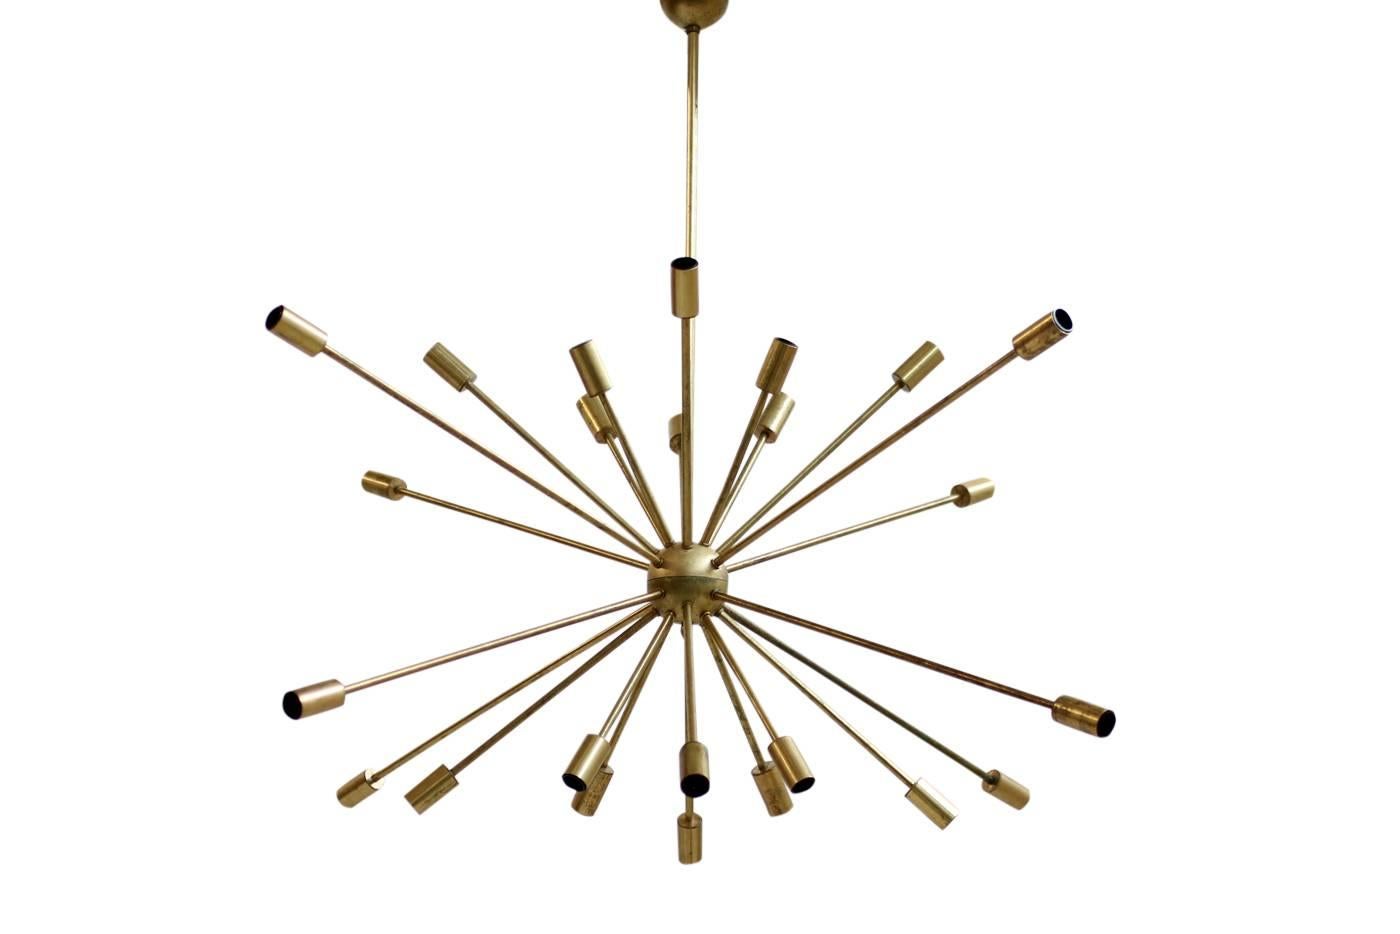 Beautiful Italian Sputnik brass chandelier, 24 arms, fantastic patina on the brass parts, in Stilnovo style, made in Italy. It can be used in the US and of course in Europe or Asia.